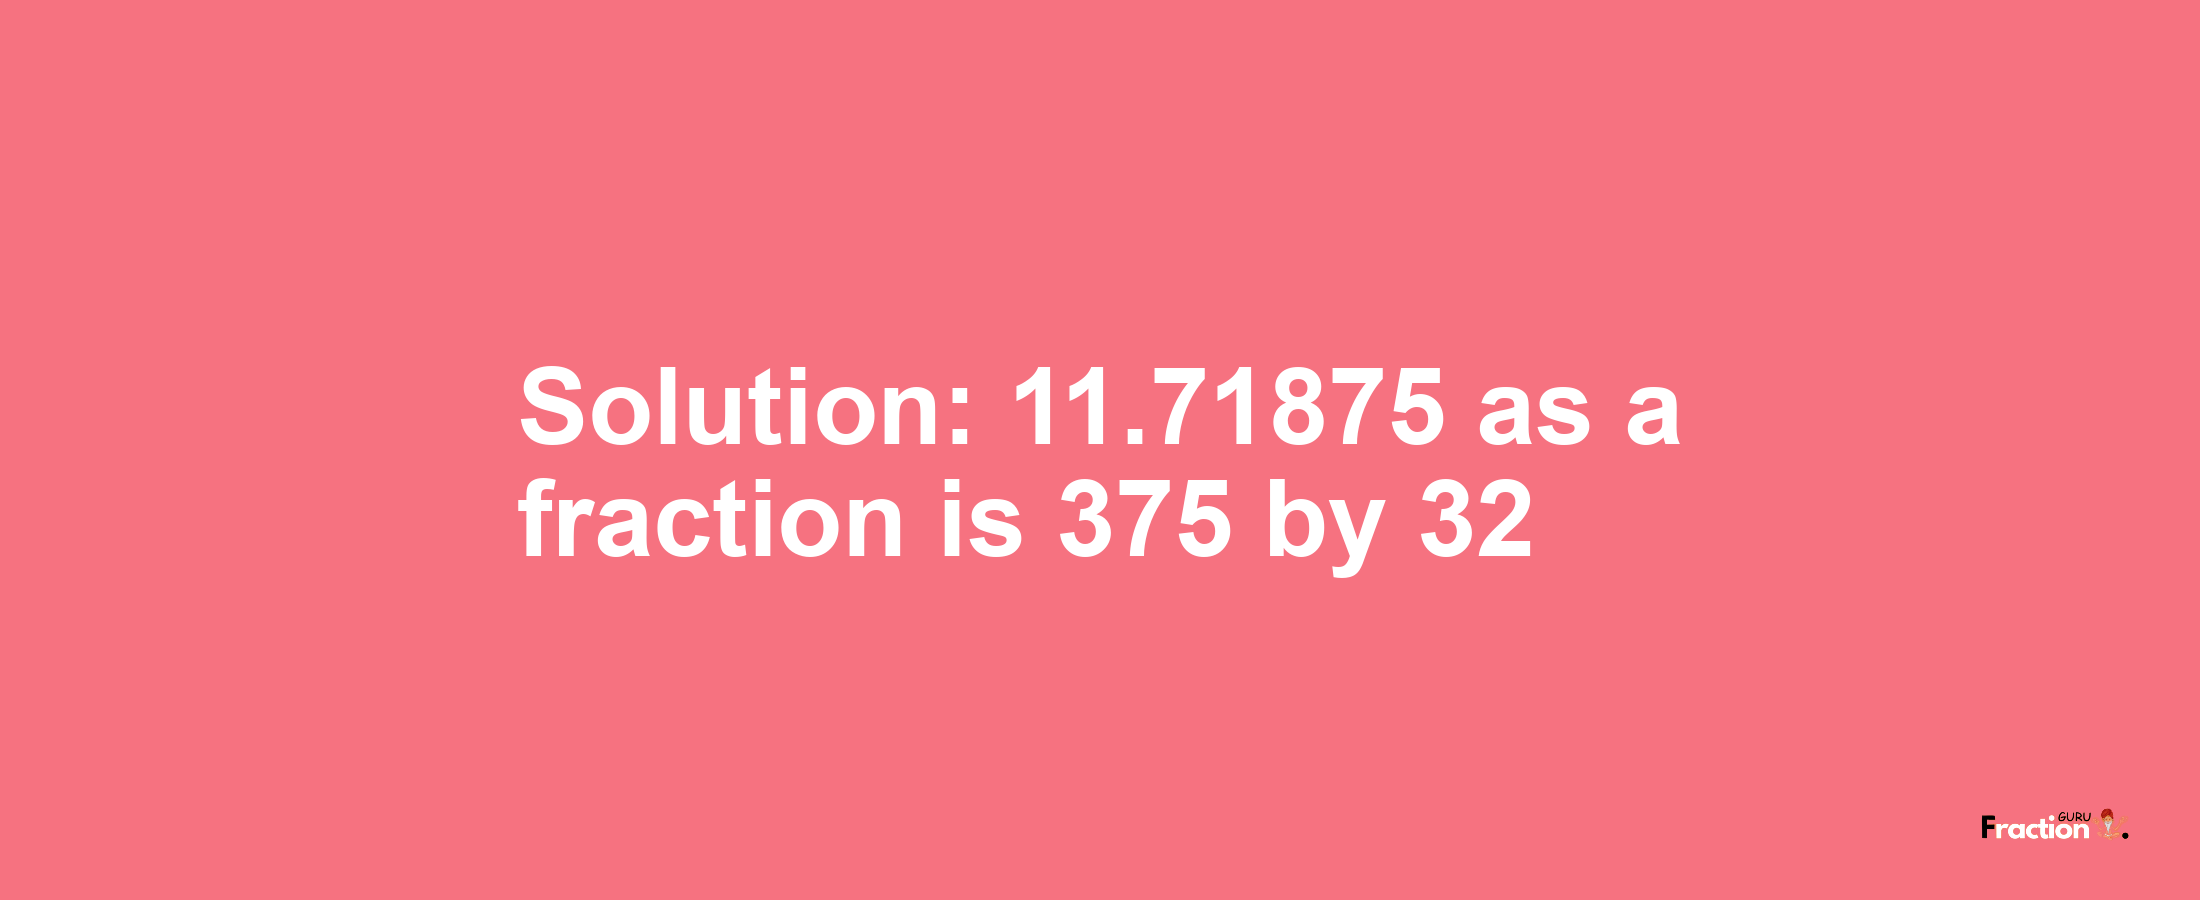 Solution:11.71875 as a fraction is 375/32